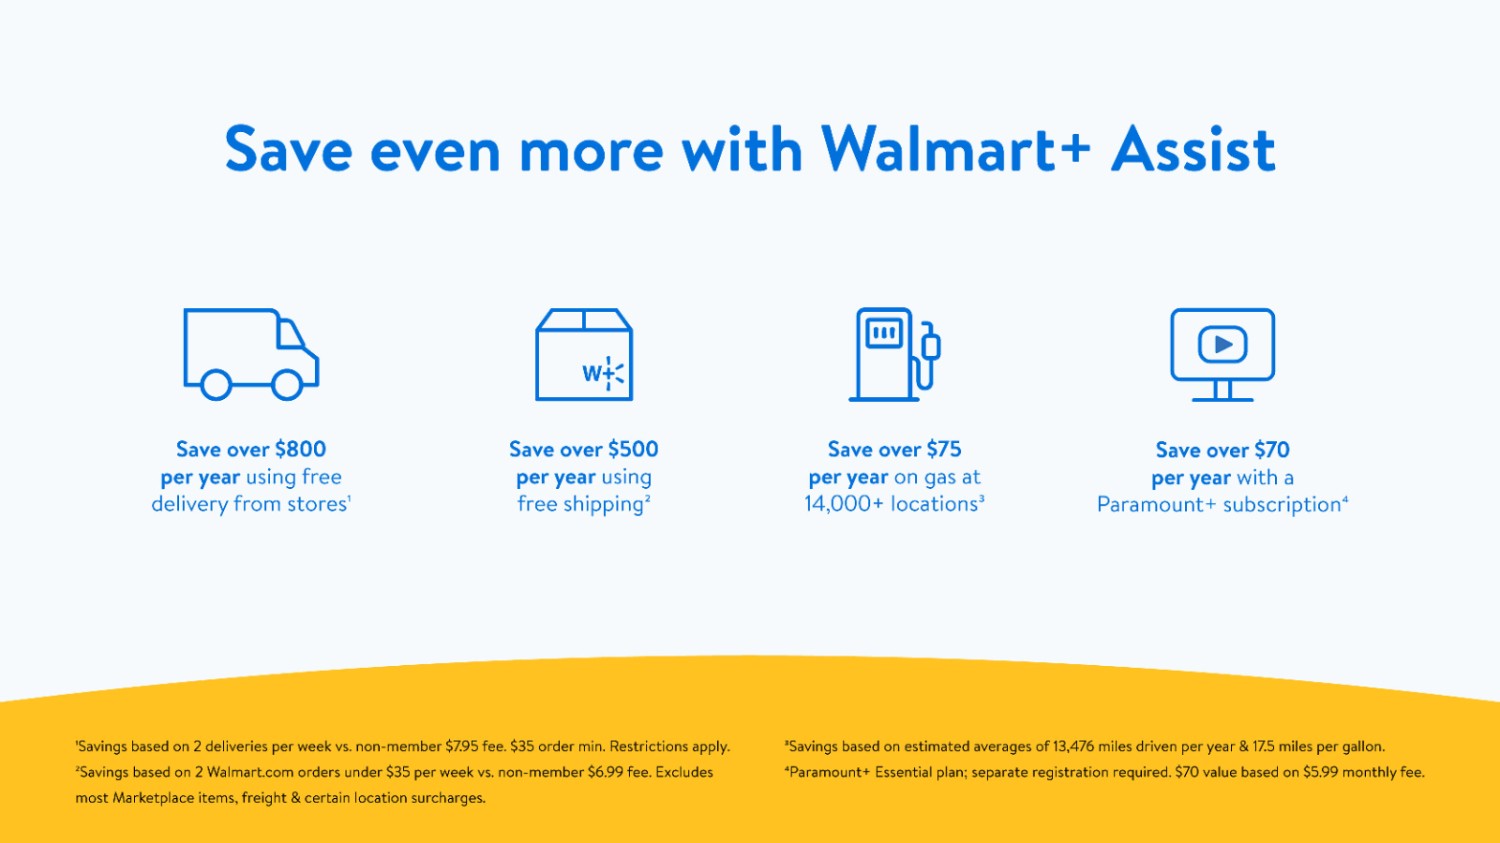 Walmart rolling out free next-day shipping for online orders